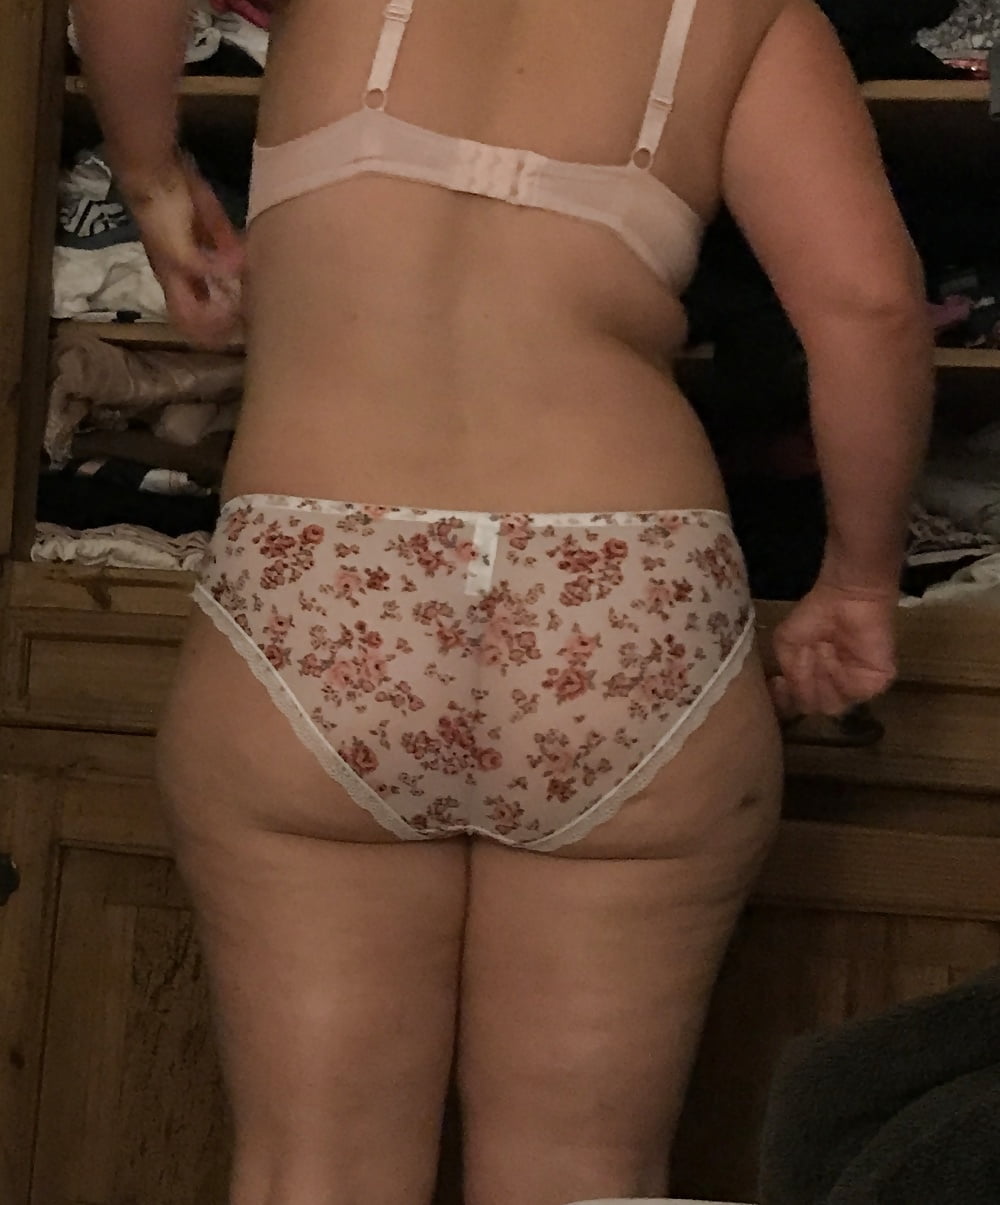 My wife panties with little flowers secret photos - Photo #2.